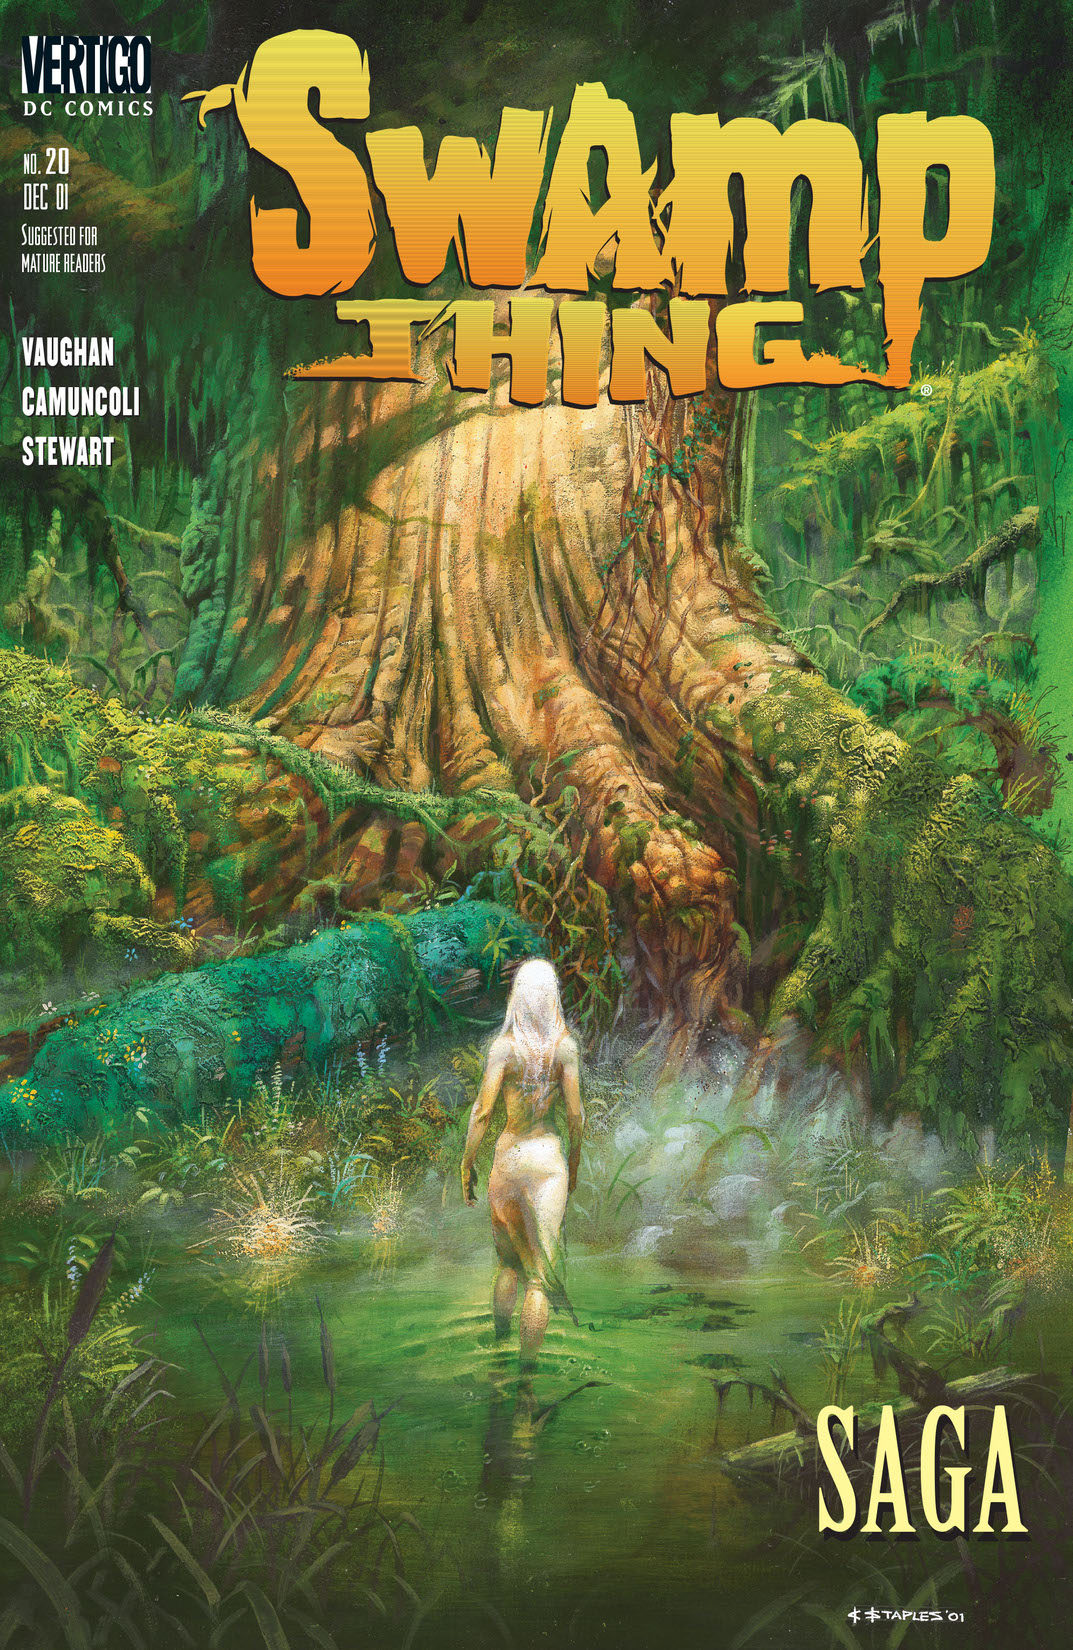 Swamp Thing (2000-) #20 preview images